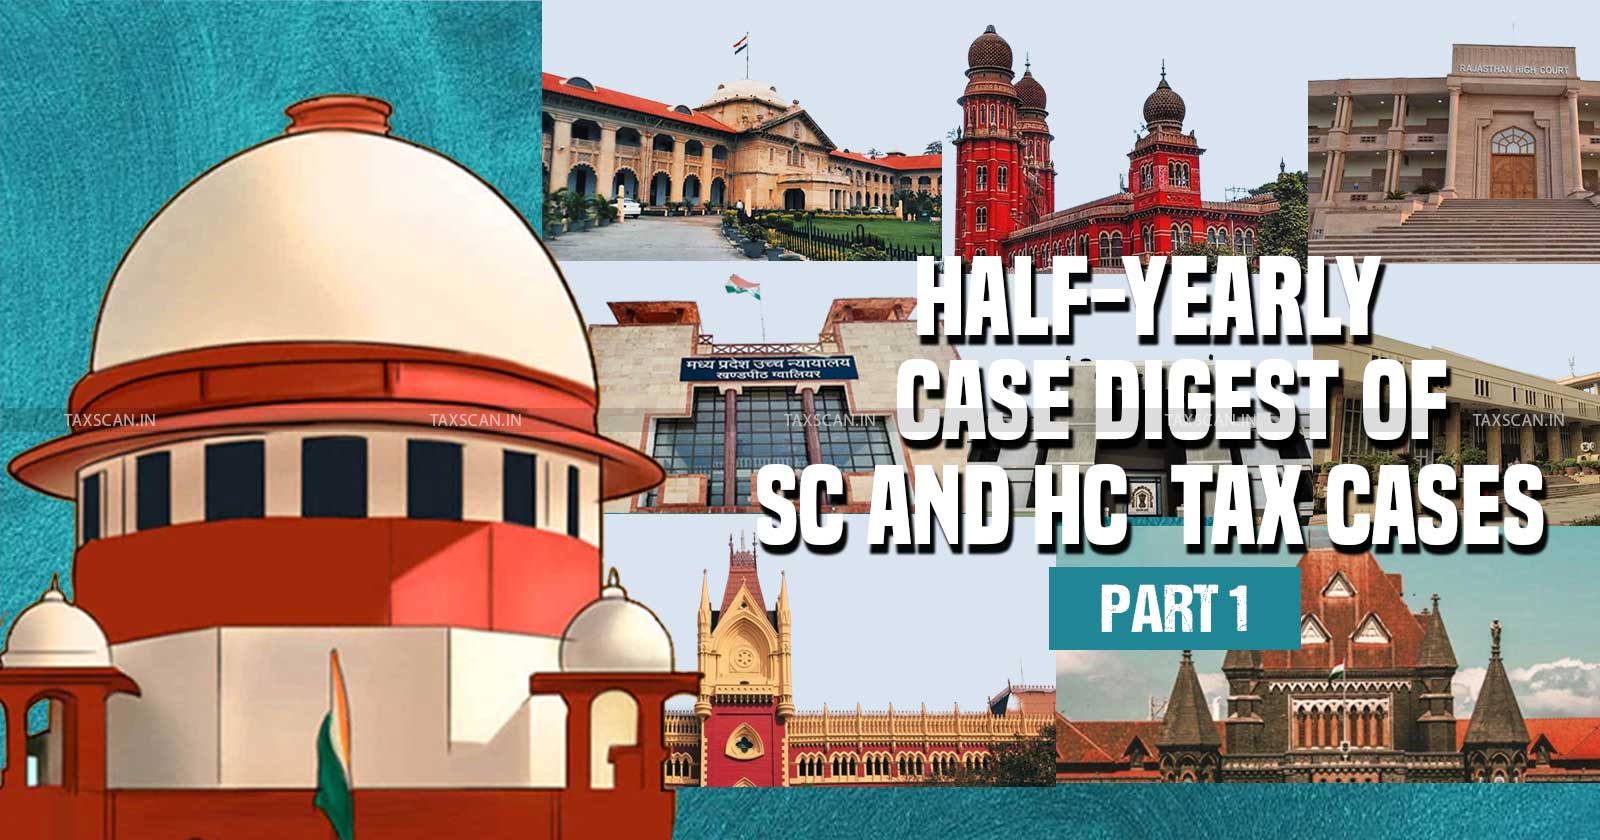 Half Yearly Case Digest - Supreme Court and High Courts Case Digest - Half Yearly Digest of Tax Cases - Supreme Court Tax Judgments - Tax Digest - taxscan